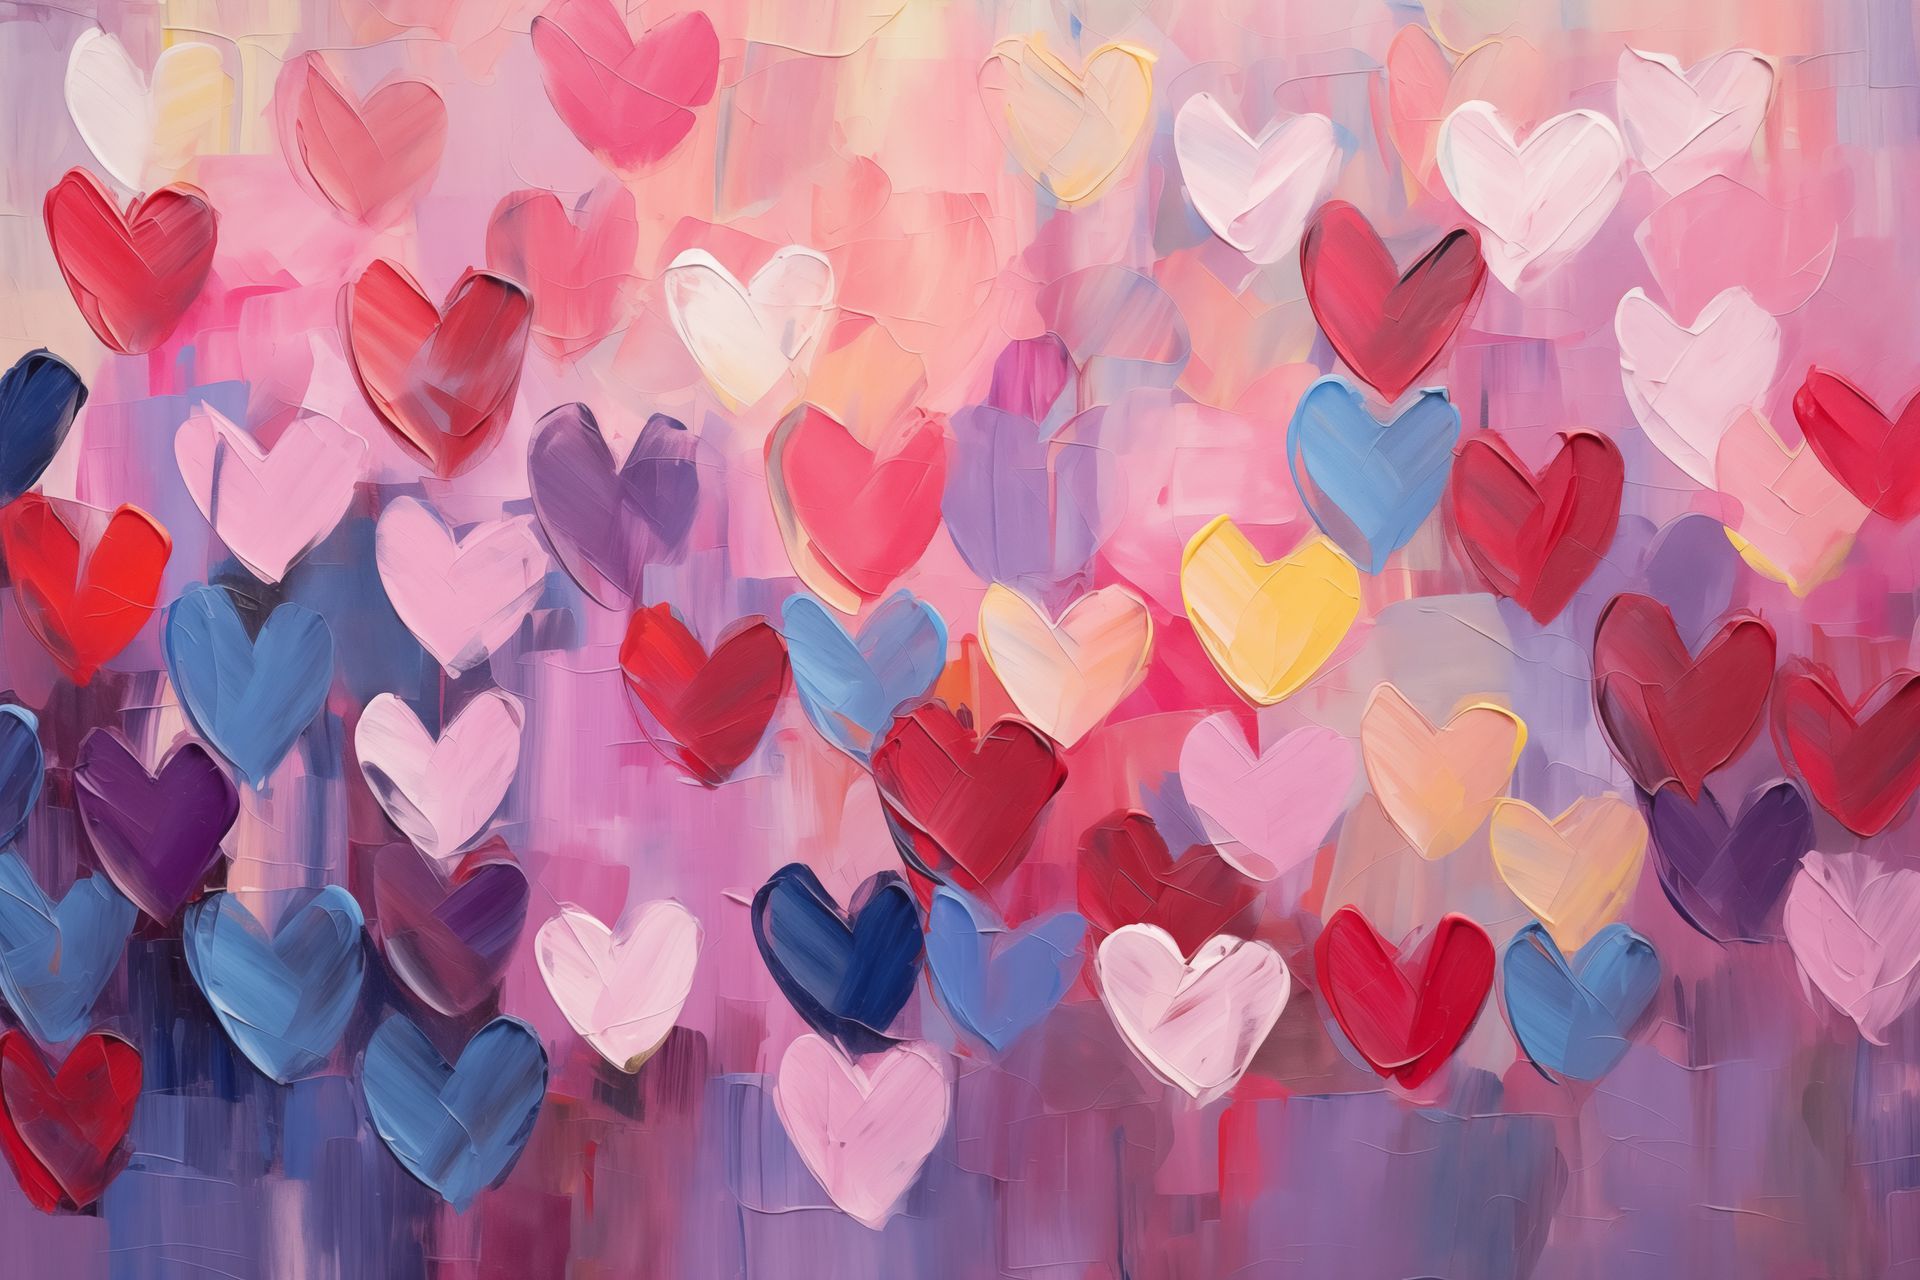 Valentine's day and Galentine's day painting activities in LA